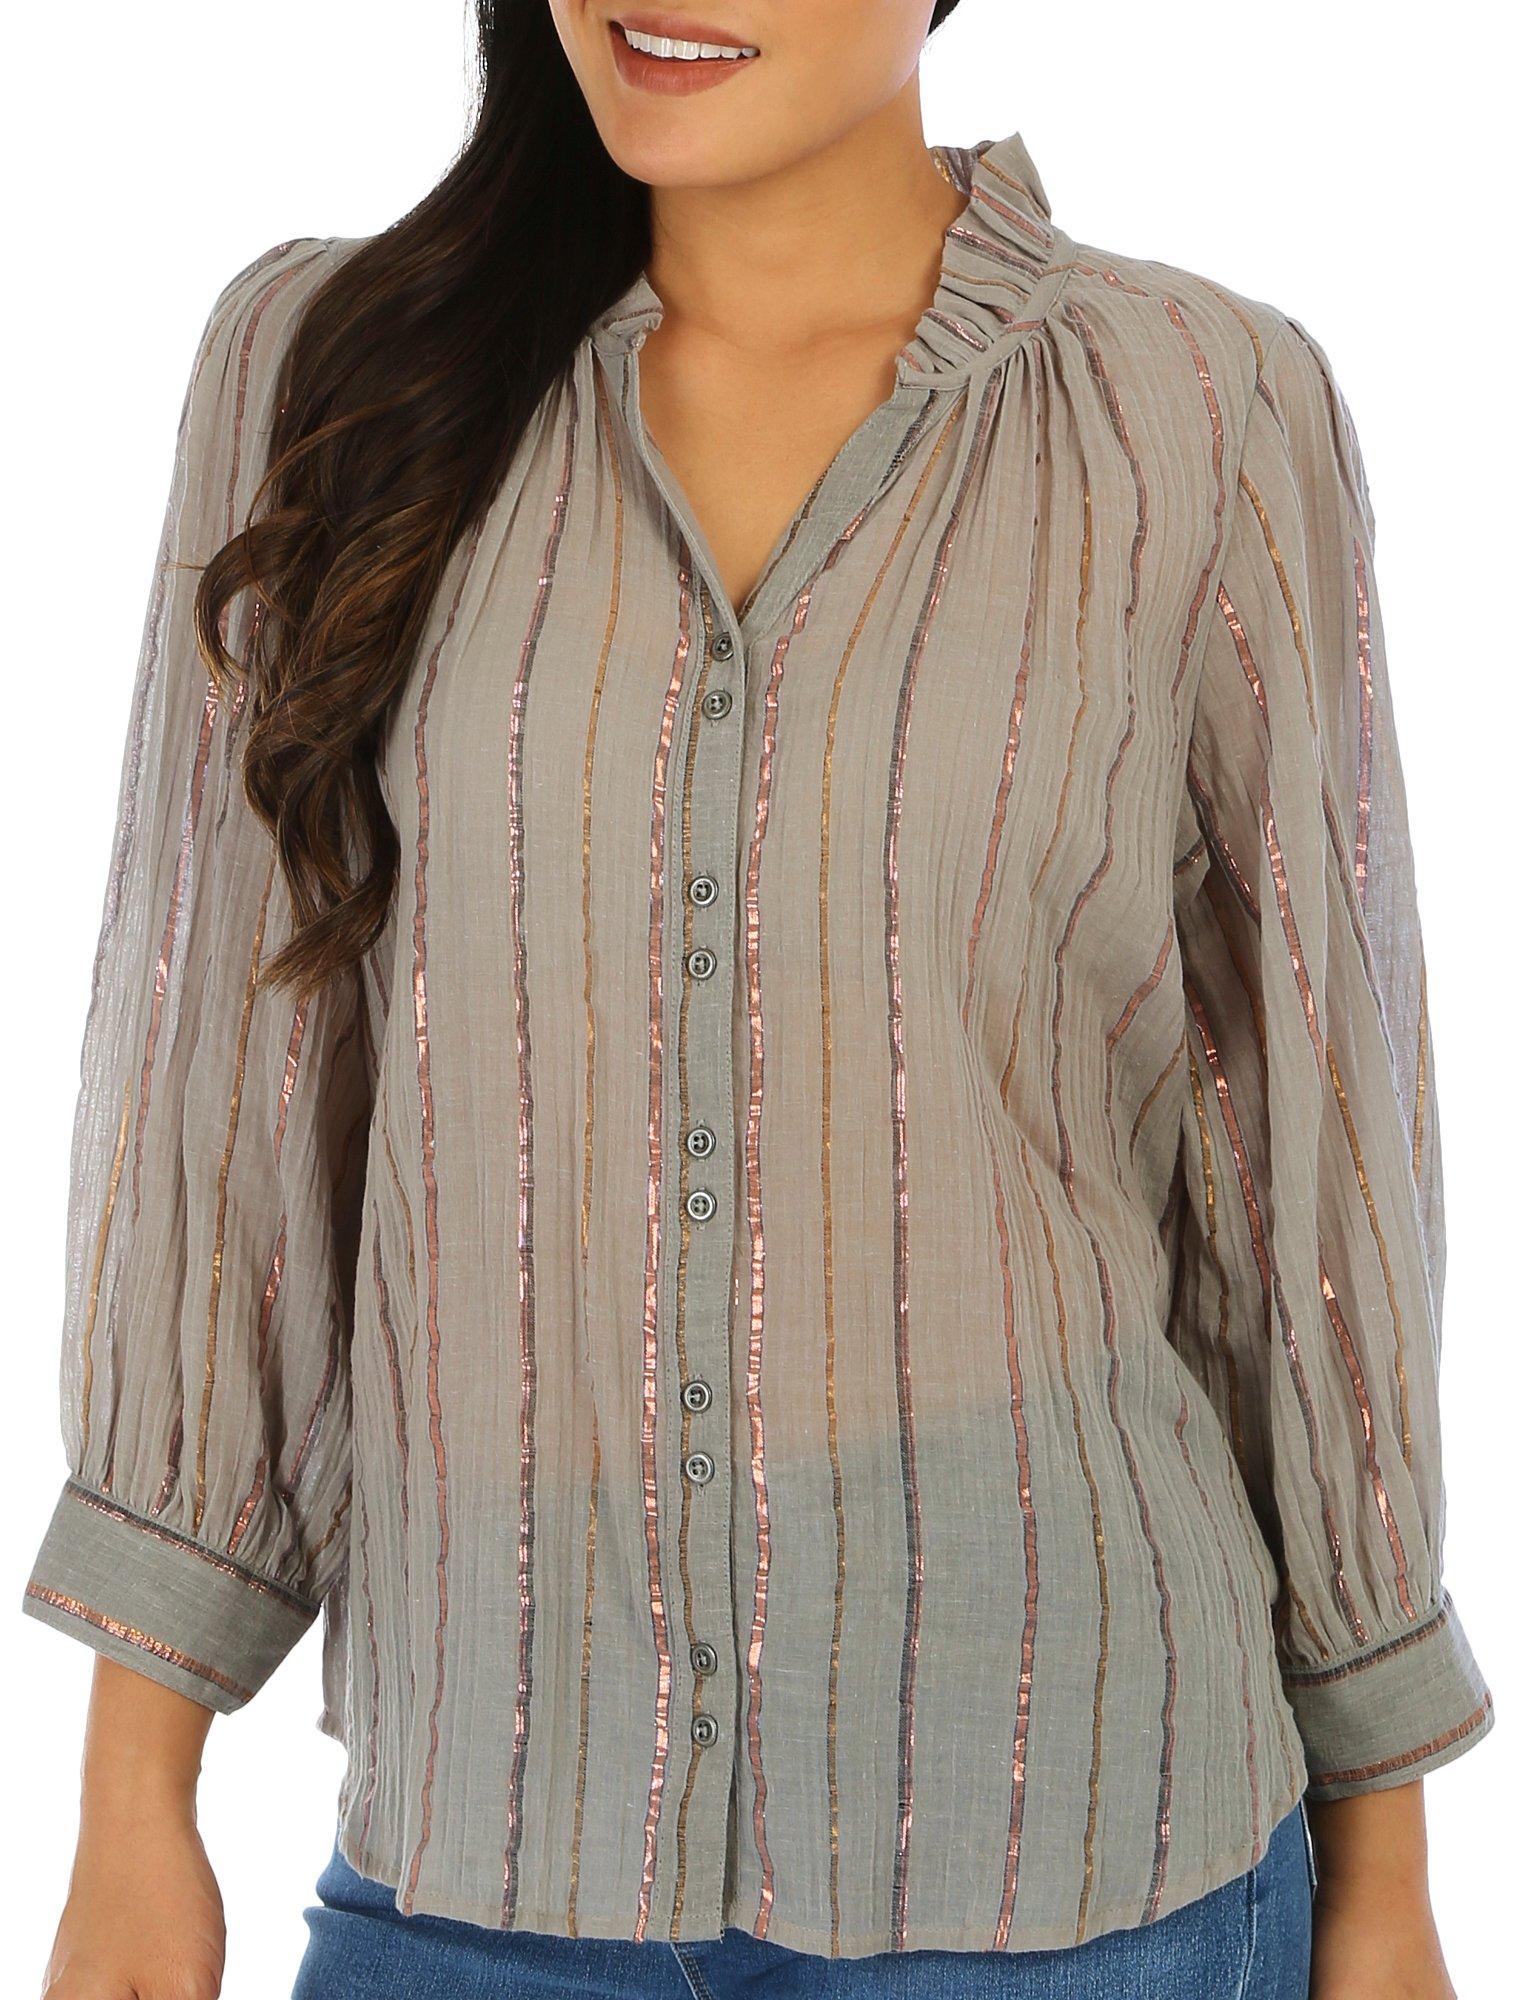 Democracy Womens Striped Button Long Sleeve Woven Top